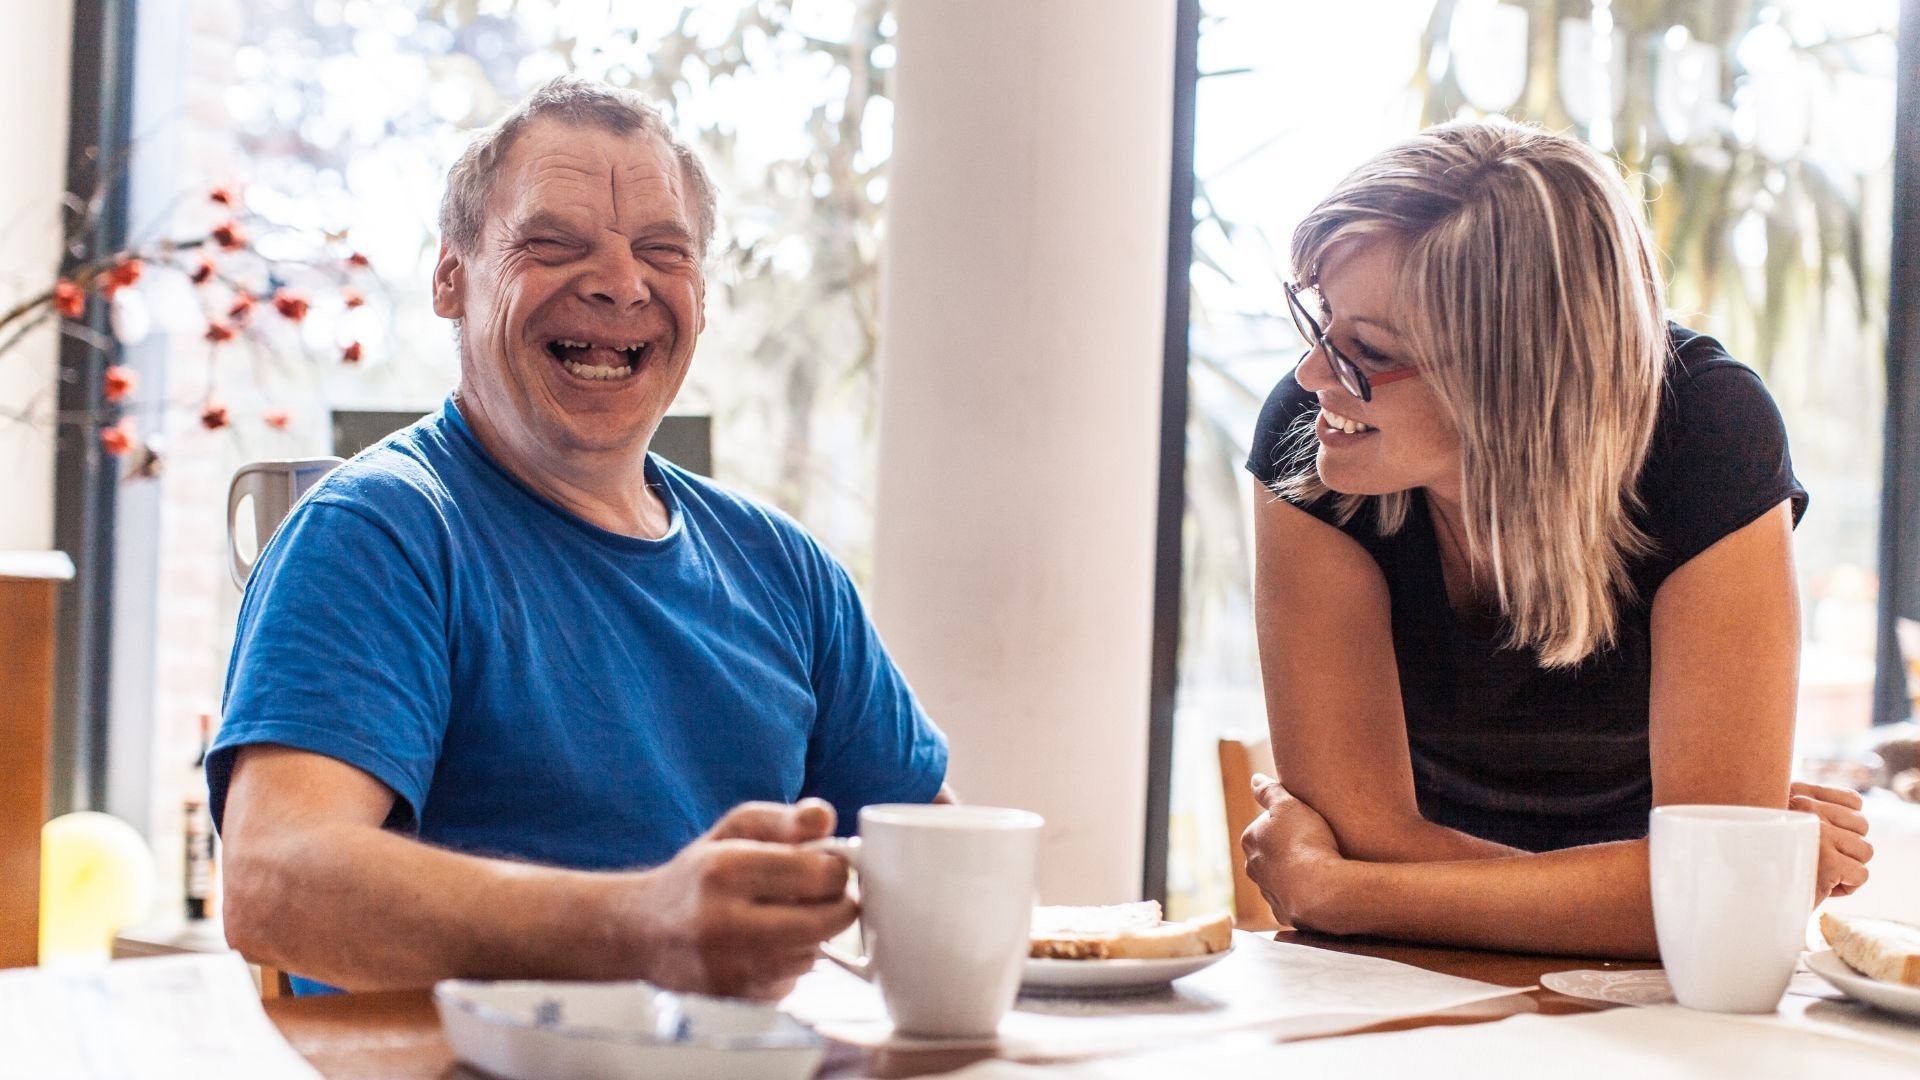 Adult with disabilities laughing with a caretaker